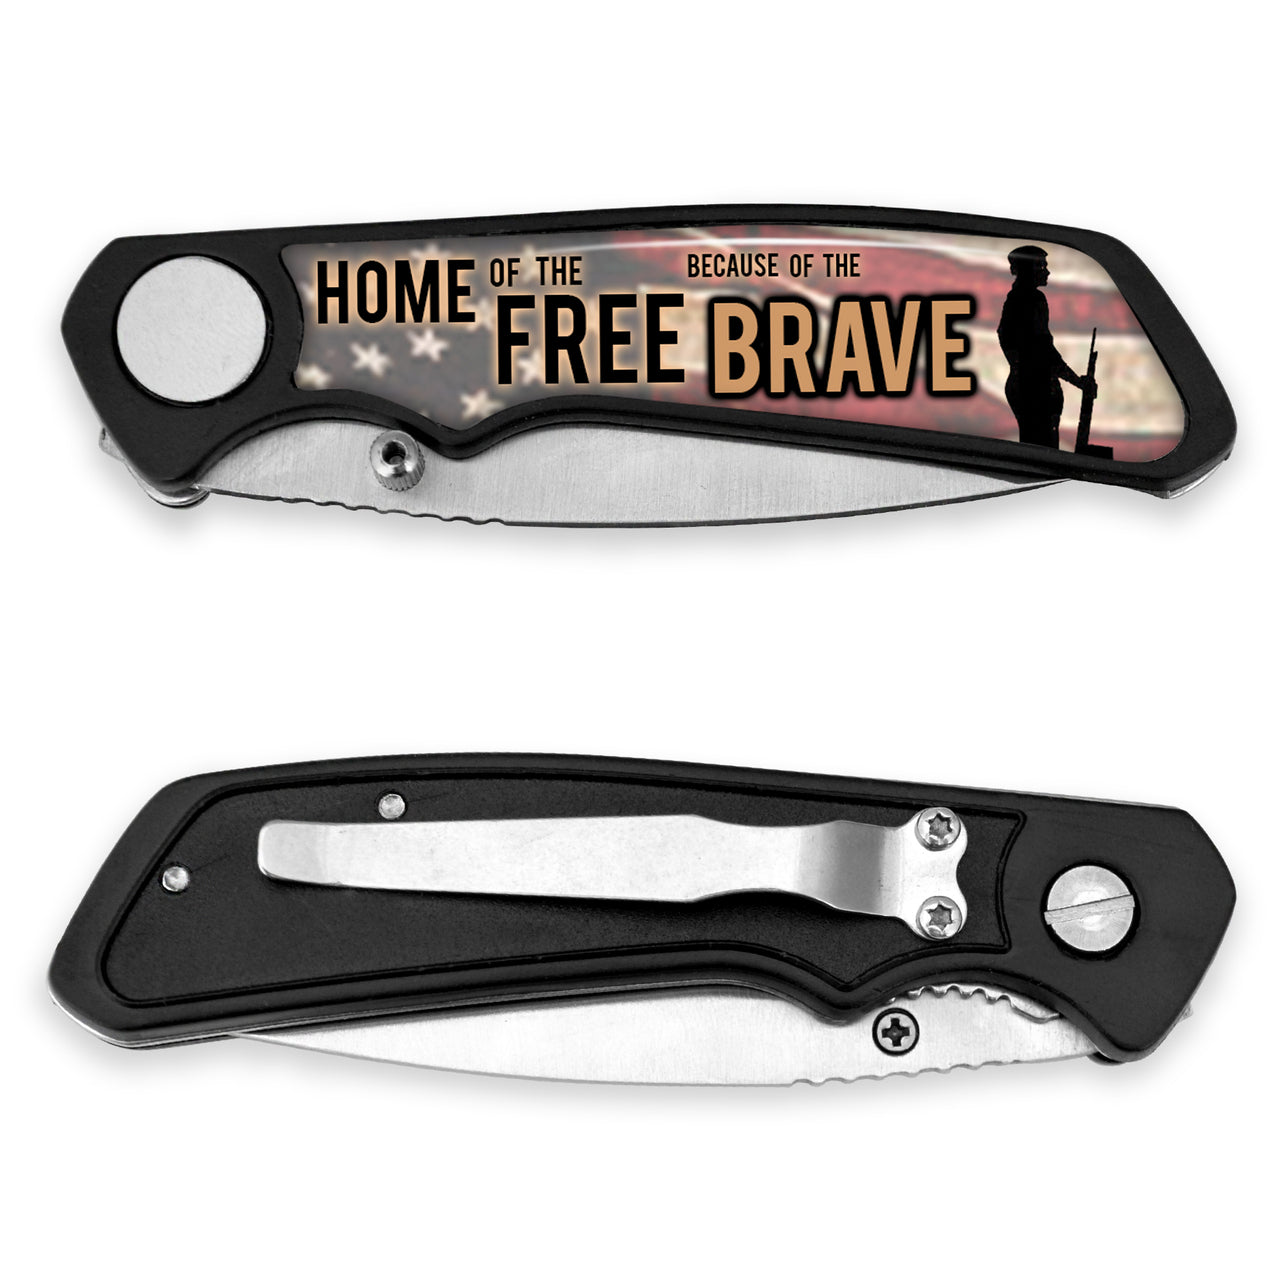 Home Of The Free Because Of The Brave Soldier Lock Back Pocket Knife